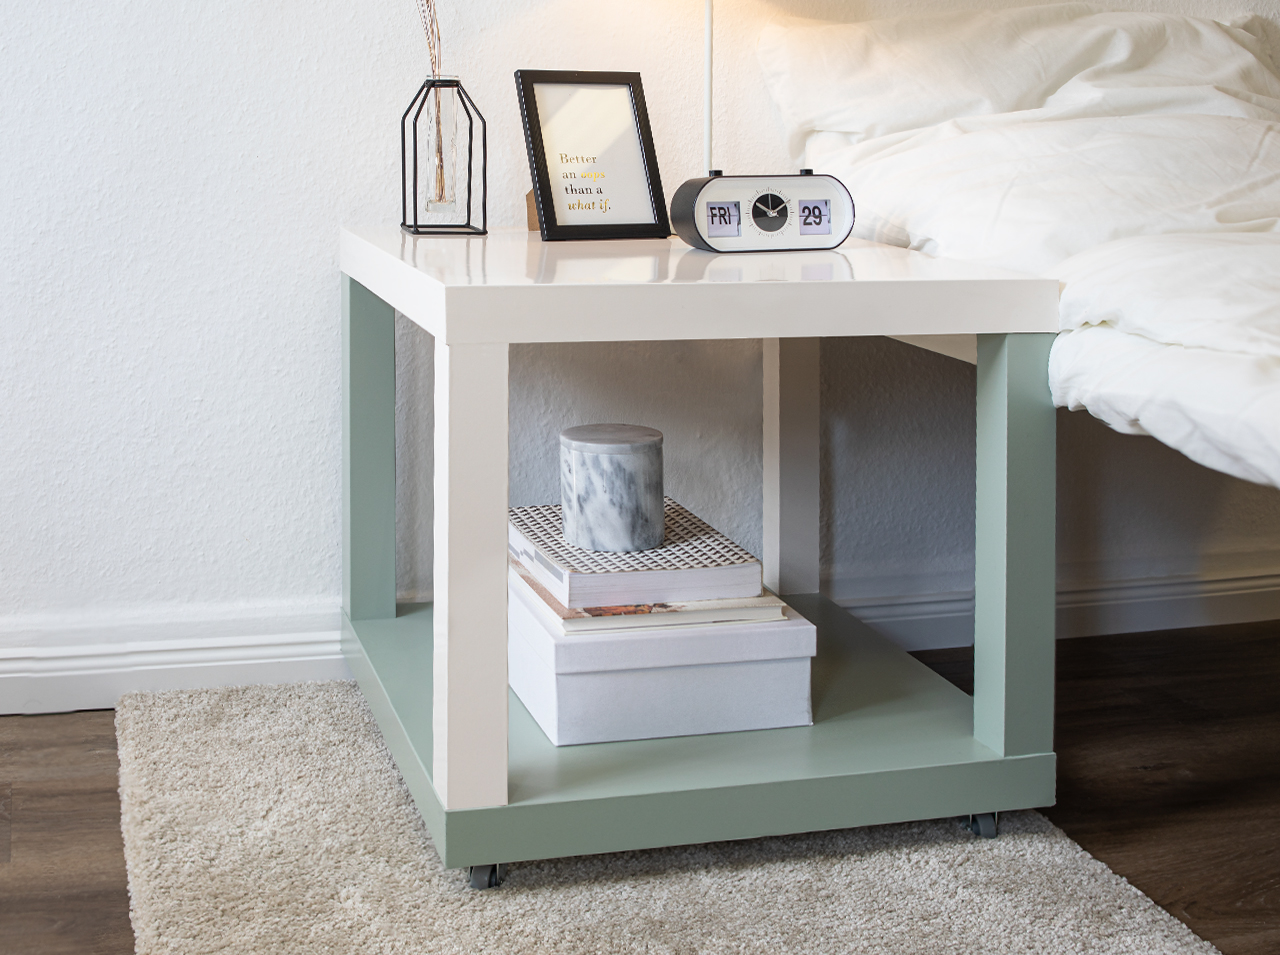 Two-color square side table.